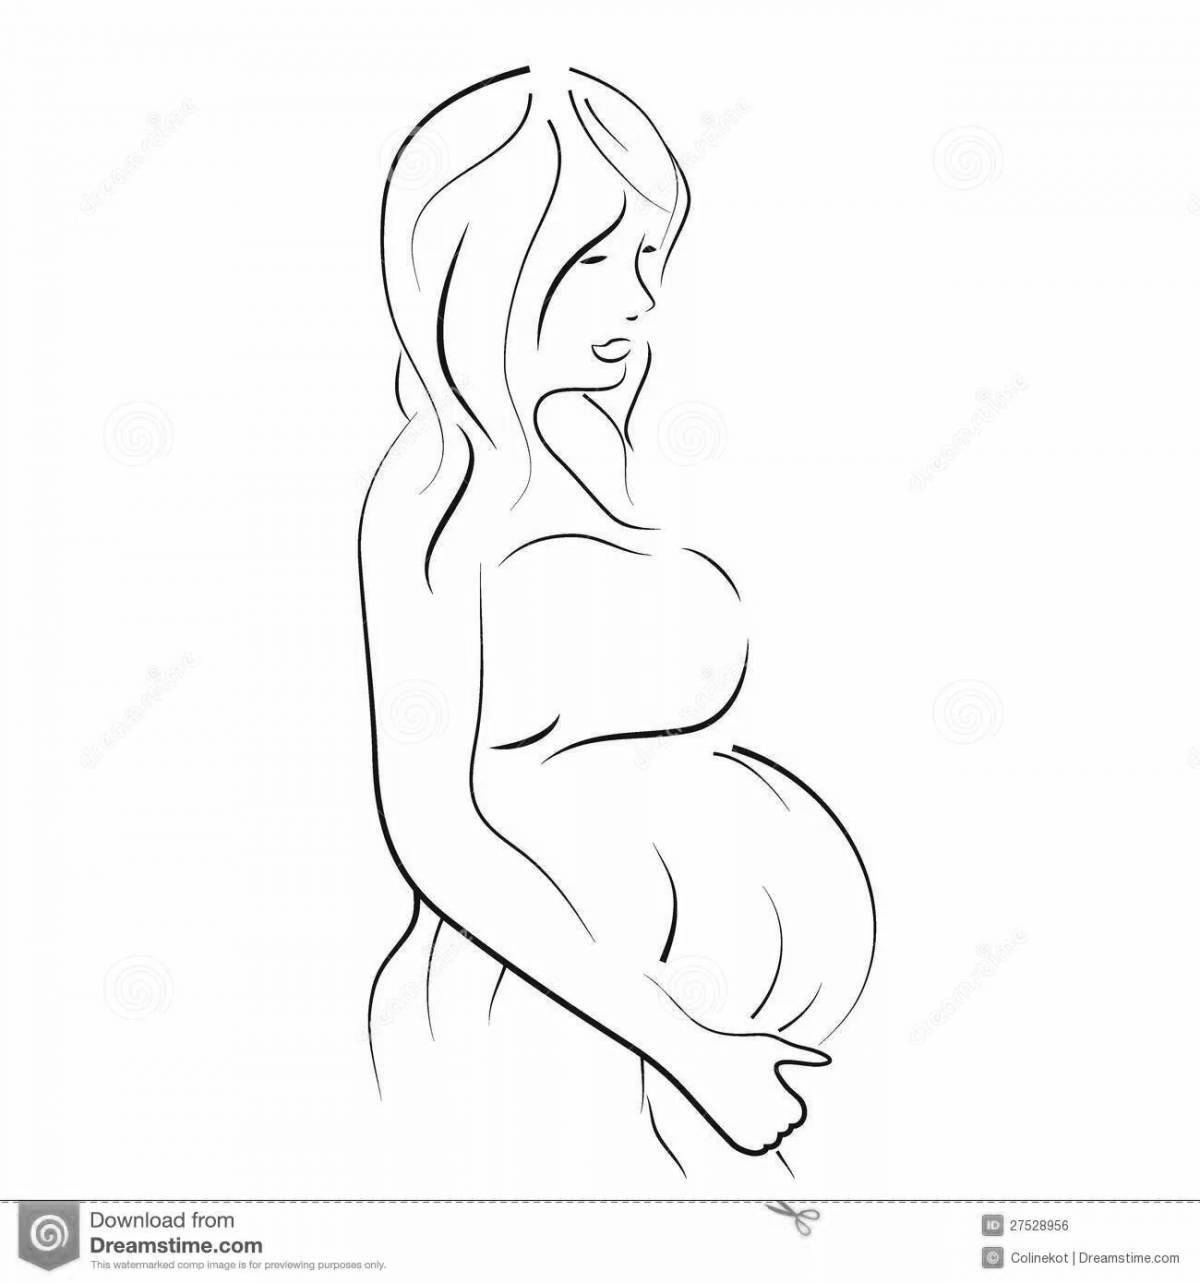 Coloring book of a glamorous pregnant girl